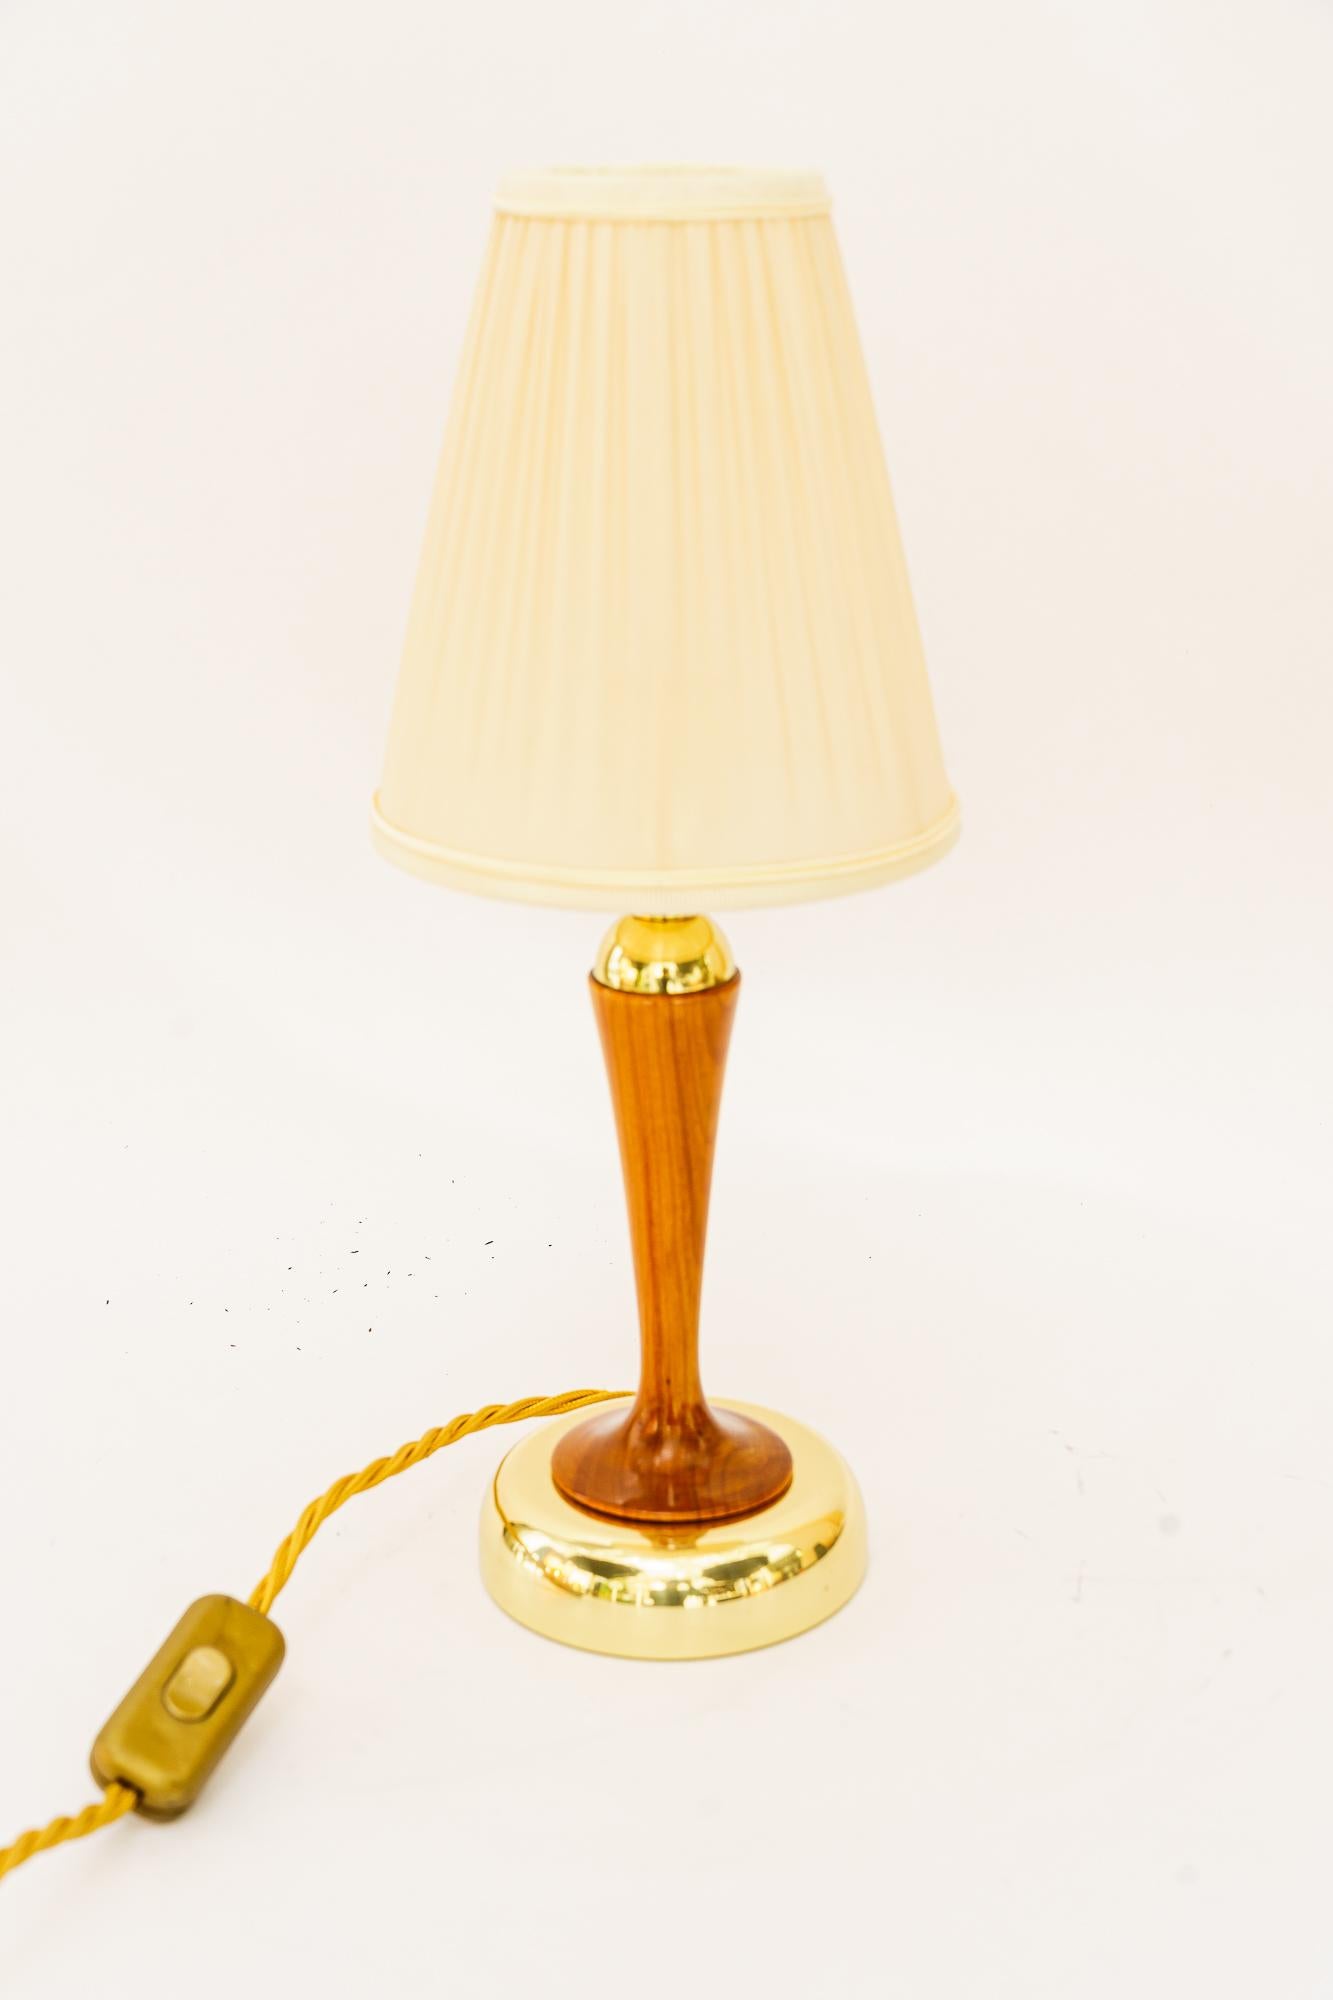 Rupert Nikoll table lamp with cherry wood and fabric shade vienna around 1950s
Brass polished and stove enameled
Cherry wood polished 
The fabric shade is replaced (New)